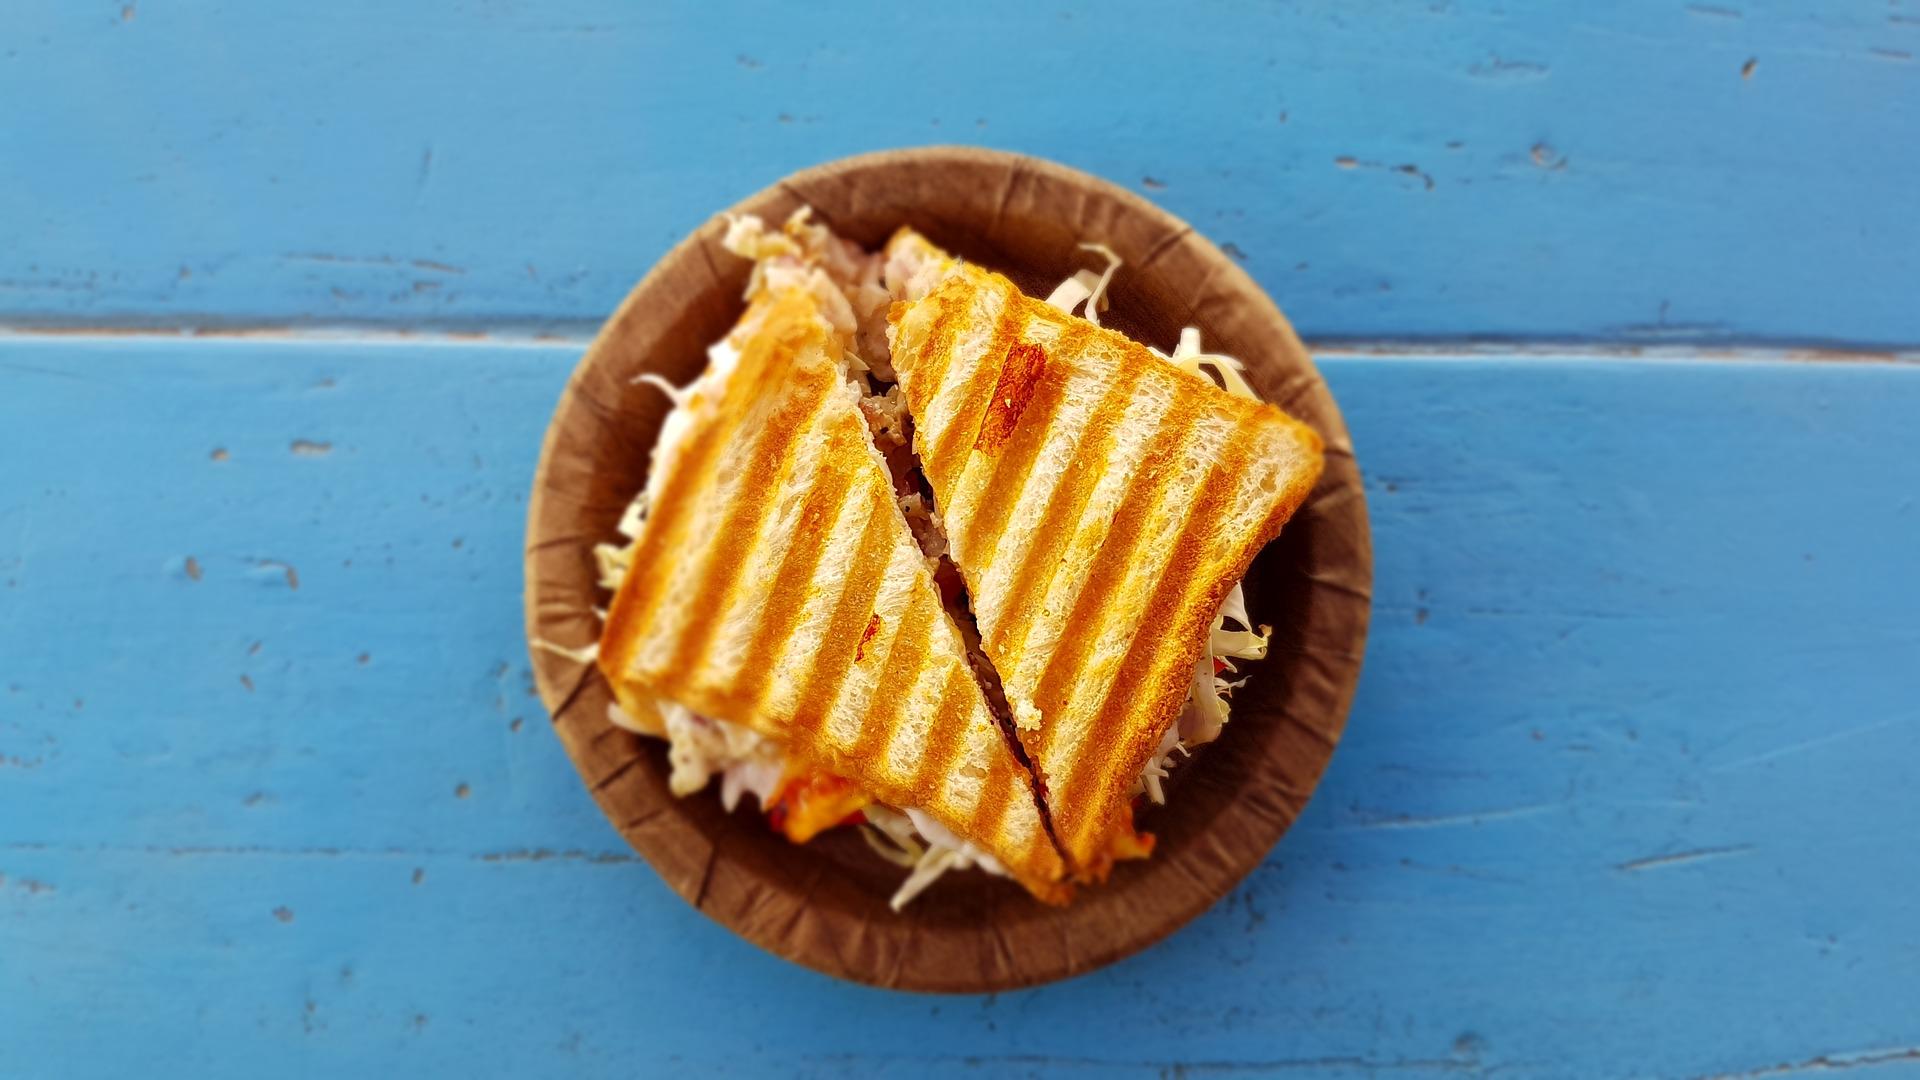 A grilled sandwich cut in half on a plate